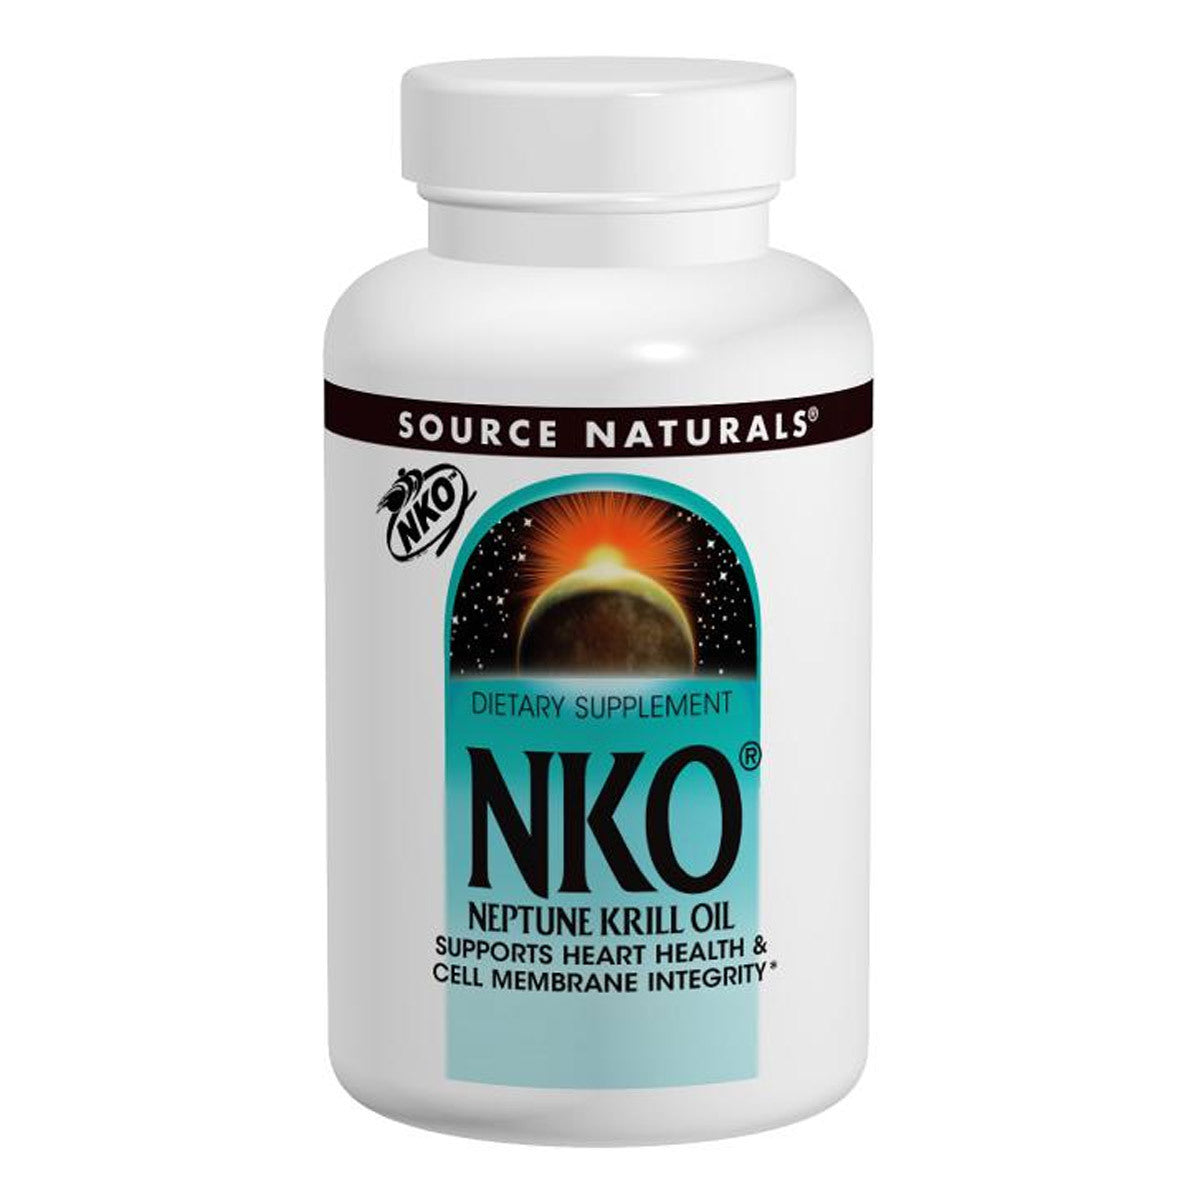 Primary image of Neptune Krill Oil 500mg